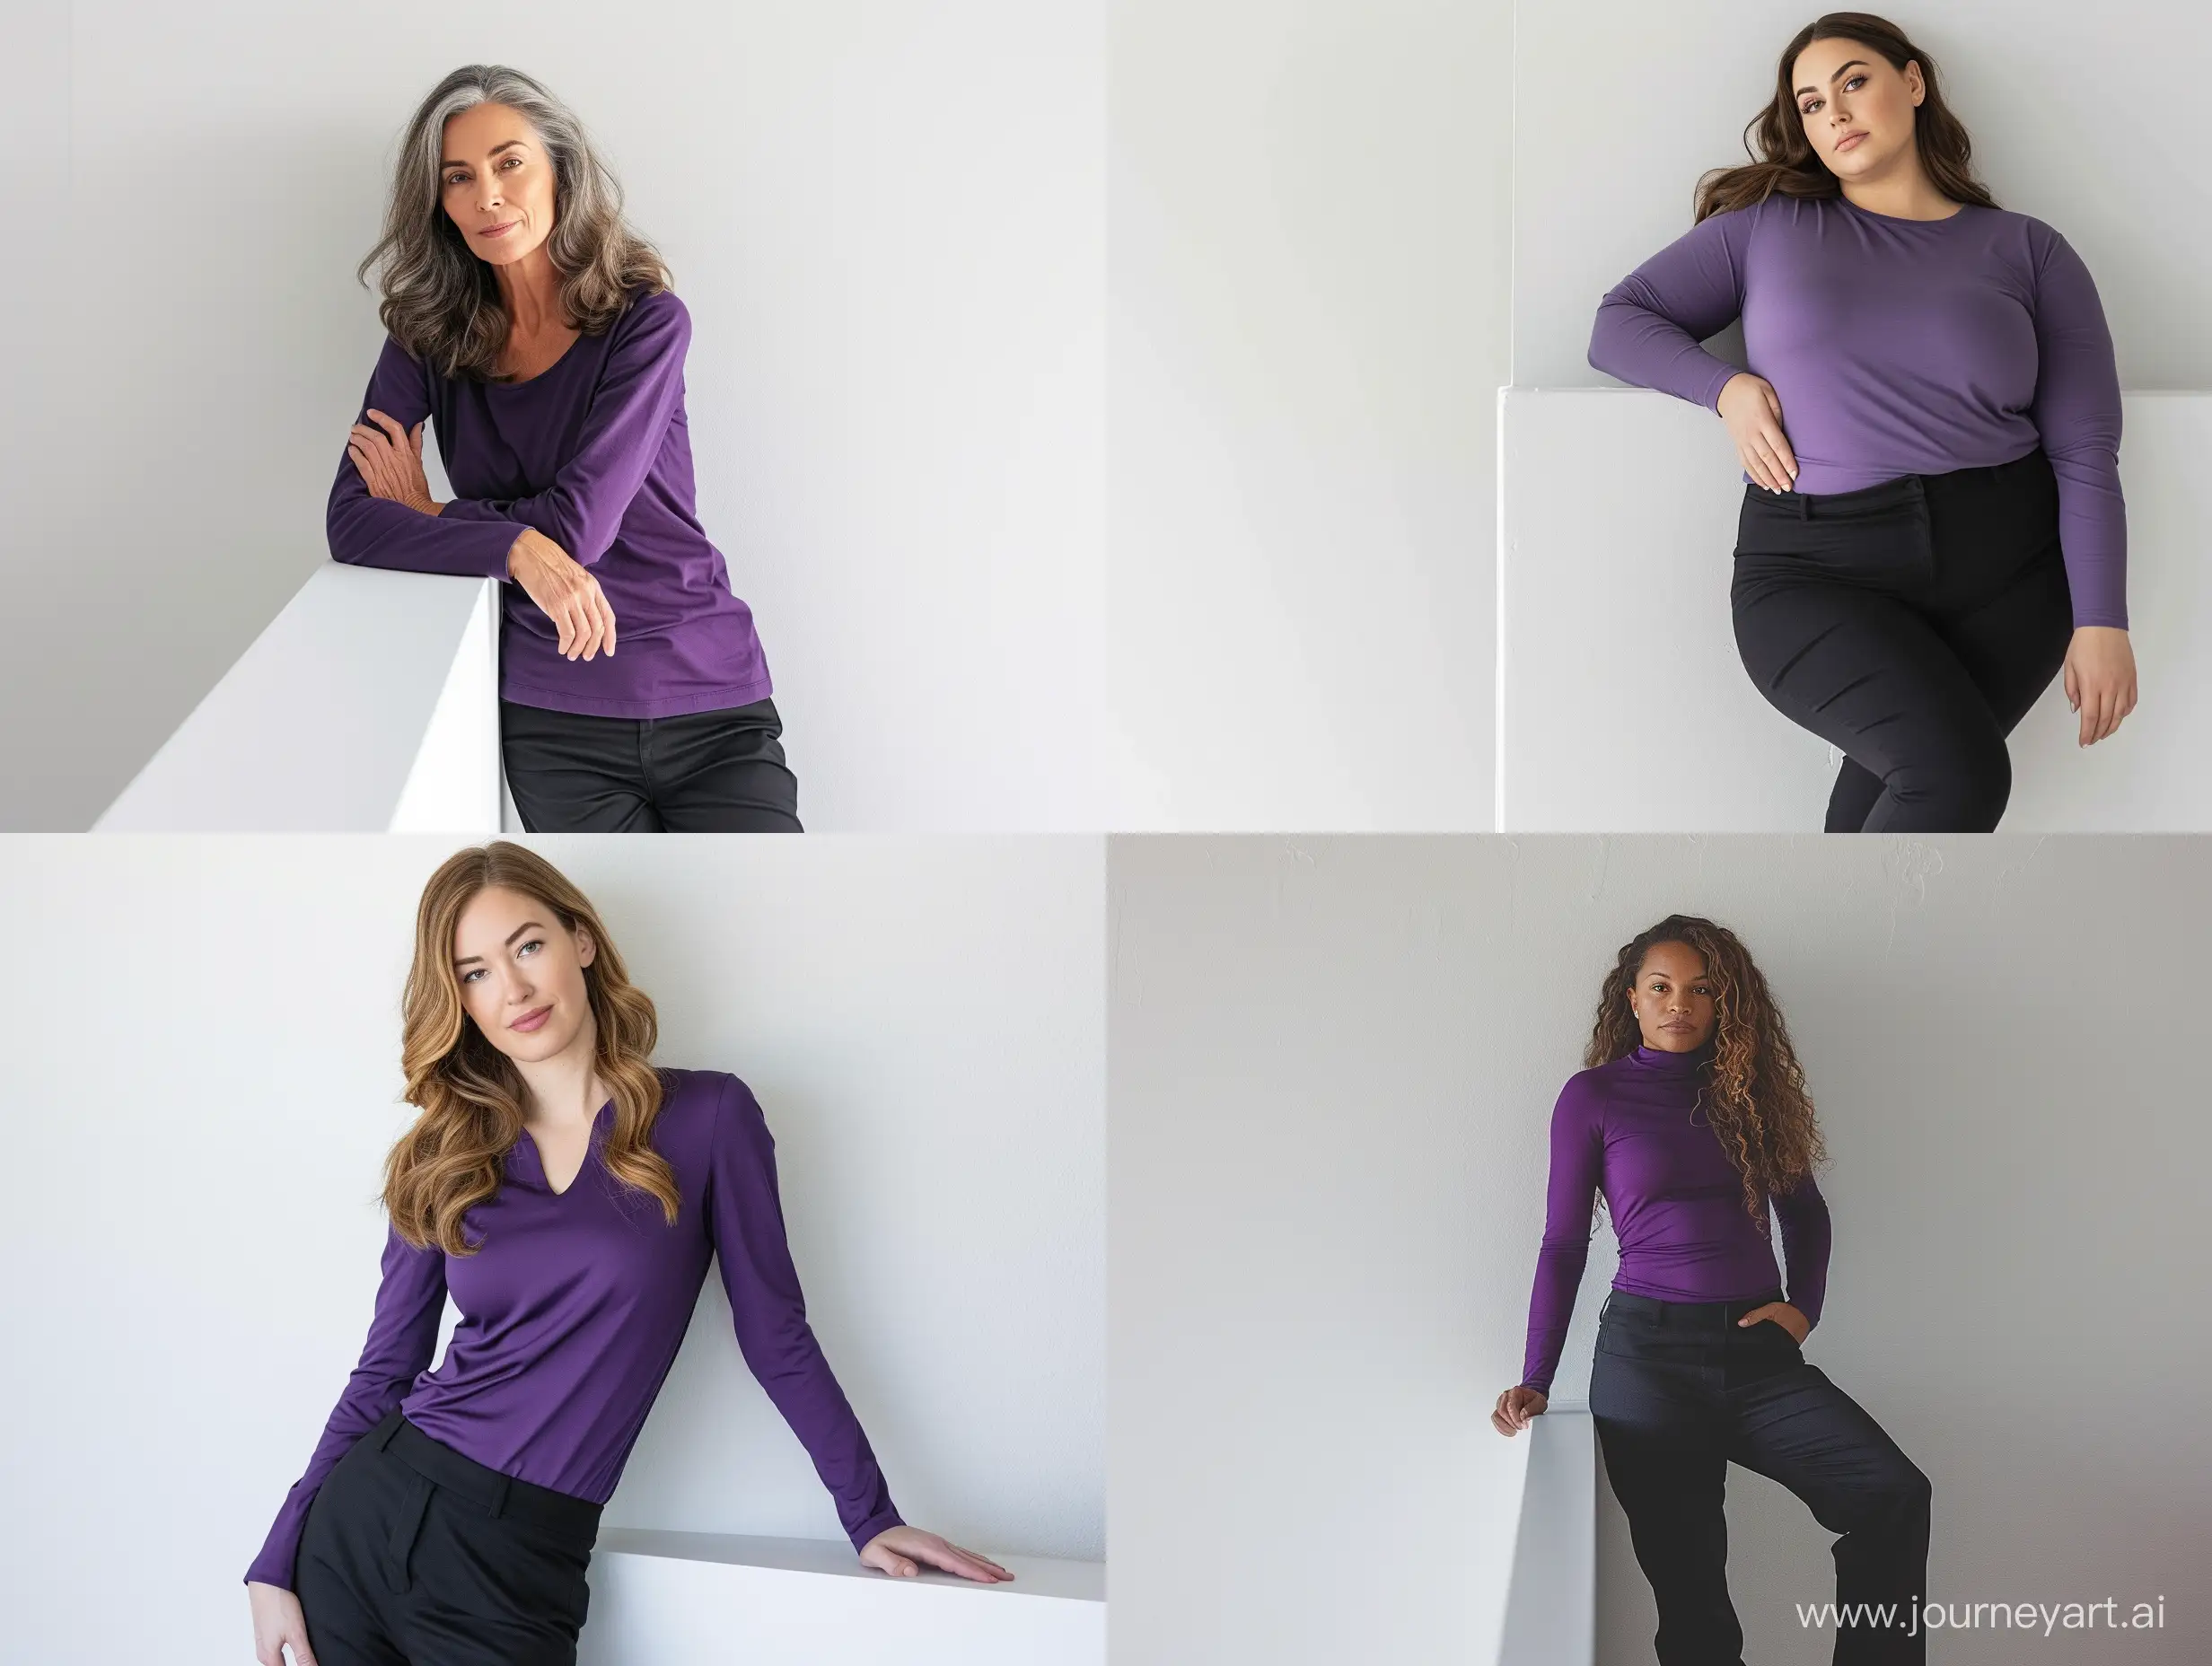 Stylish-Women-in-Purple-Long-Sleeve-Shirt-and-Black-Pants-Leaning-on-White-Wall-Portrait